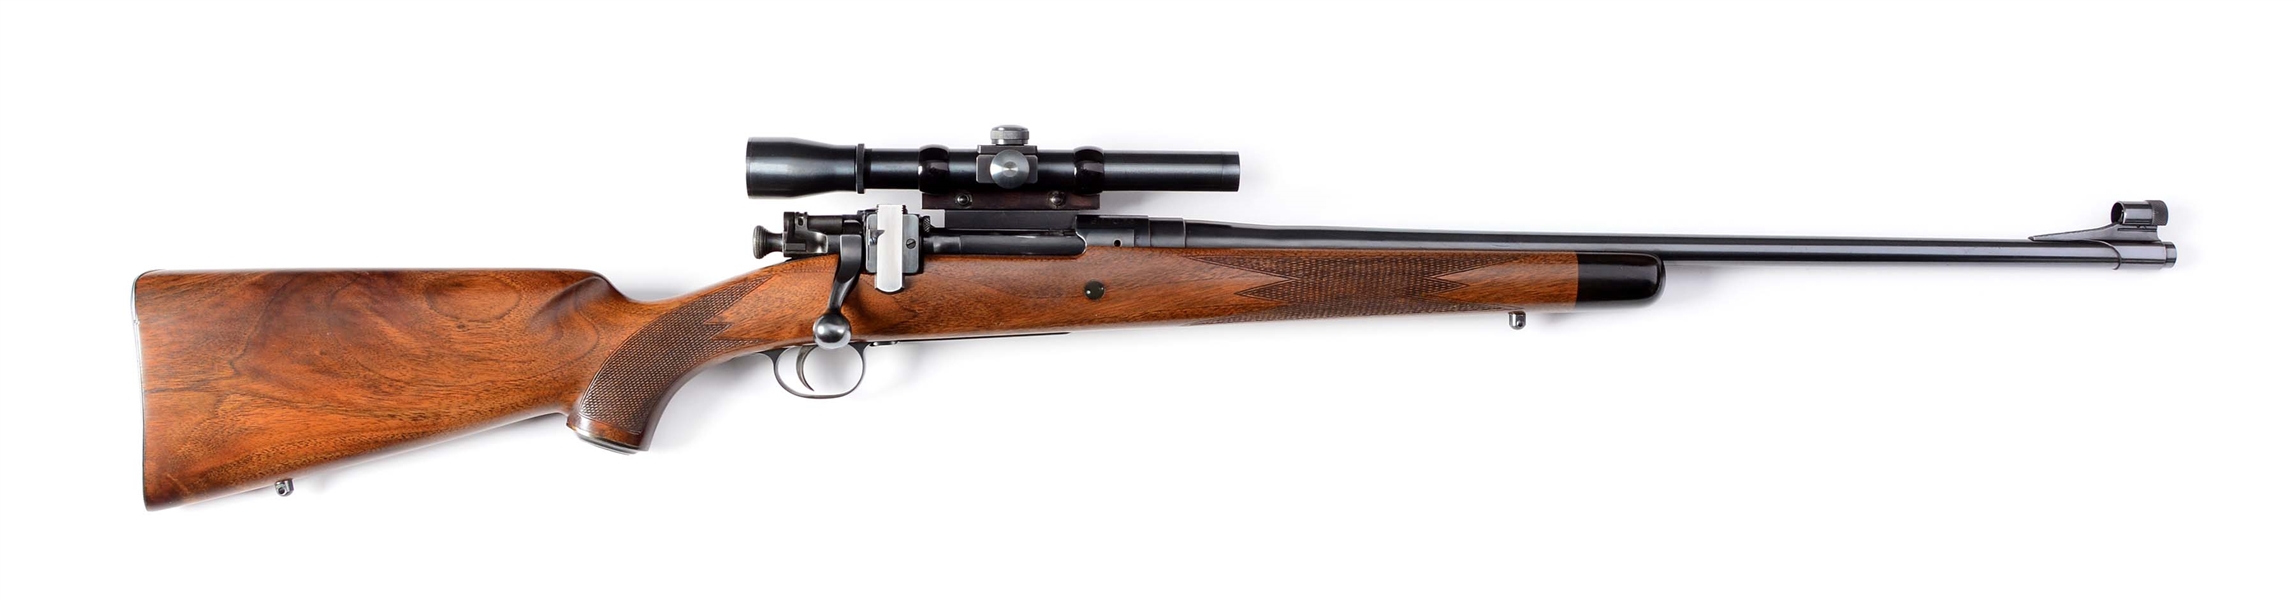 (C) CLASSIC SEDGLEY STYLED SPORTING RIFLE IN .35 HOWE - WHELEN ON MODEL 1903 SPRINGFIELD  ACTION WITH SCOPE.